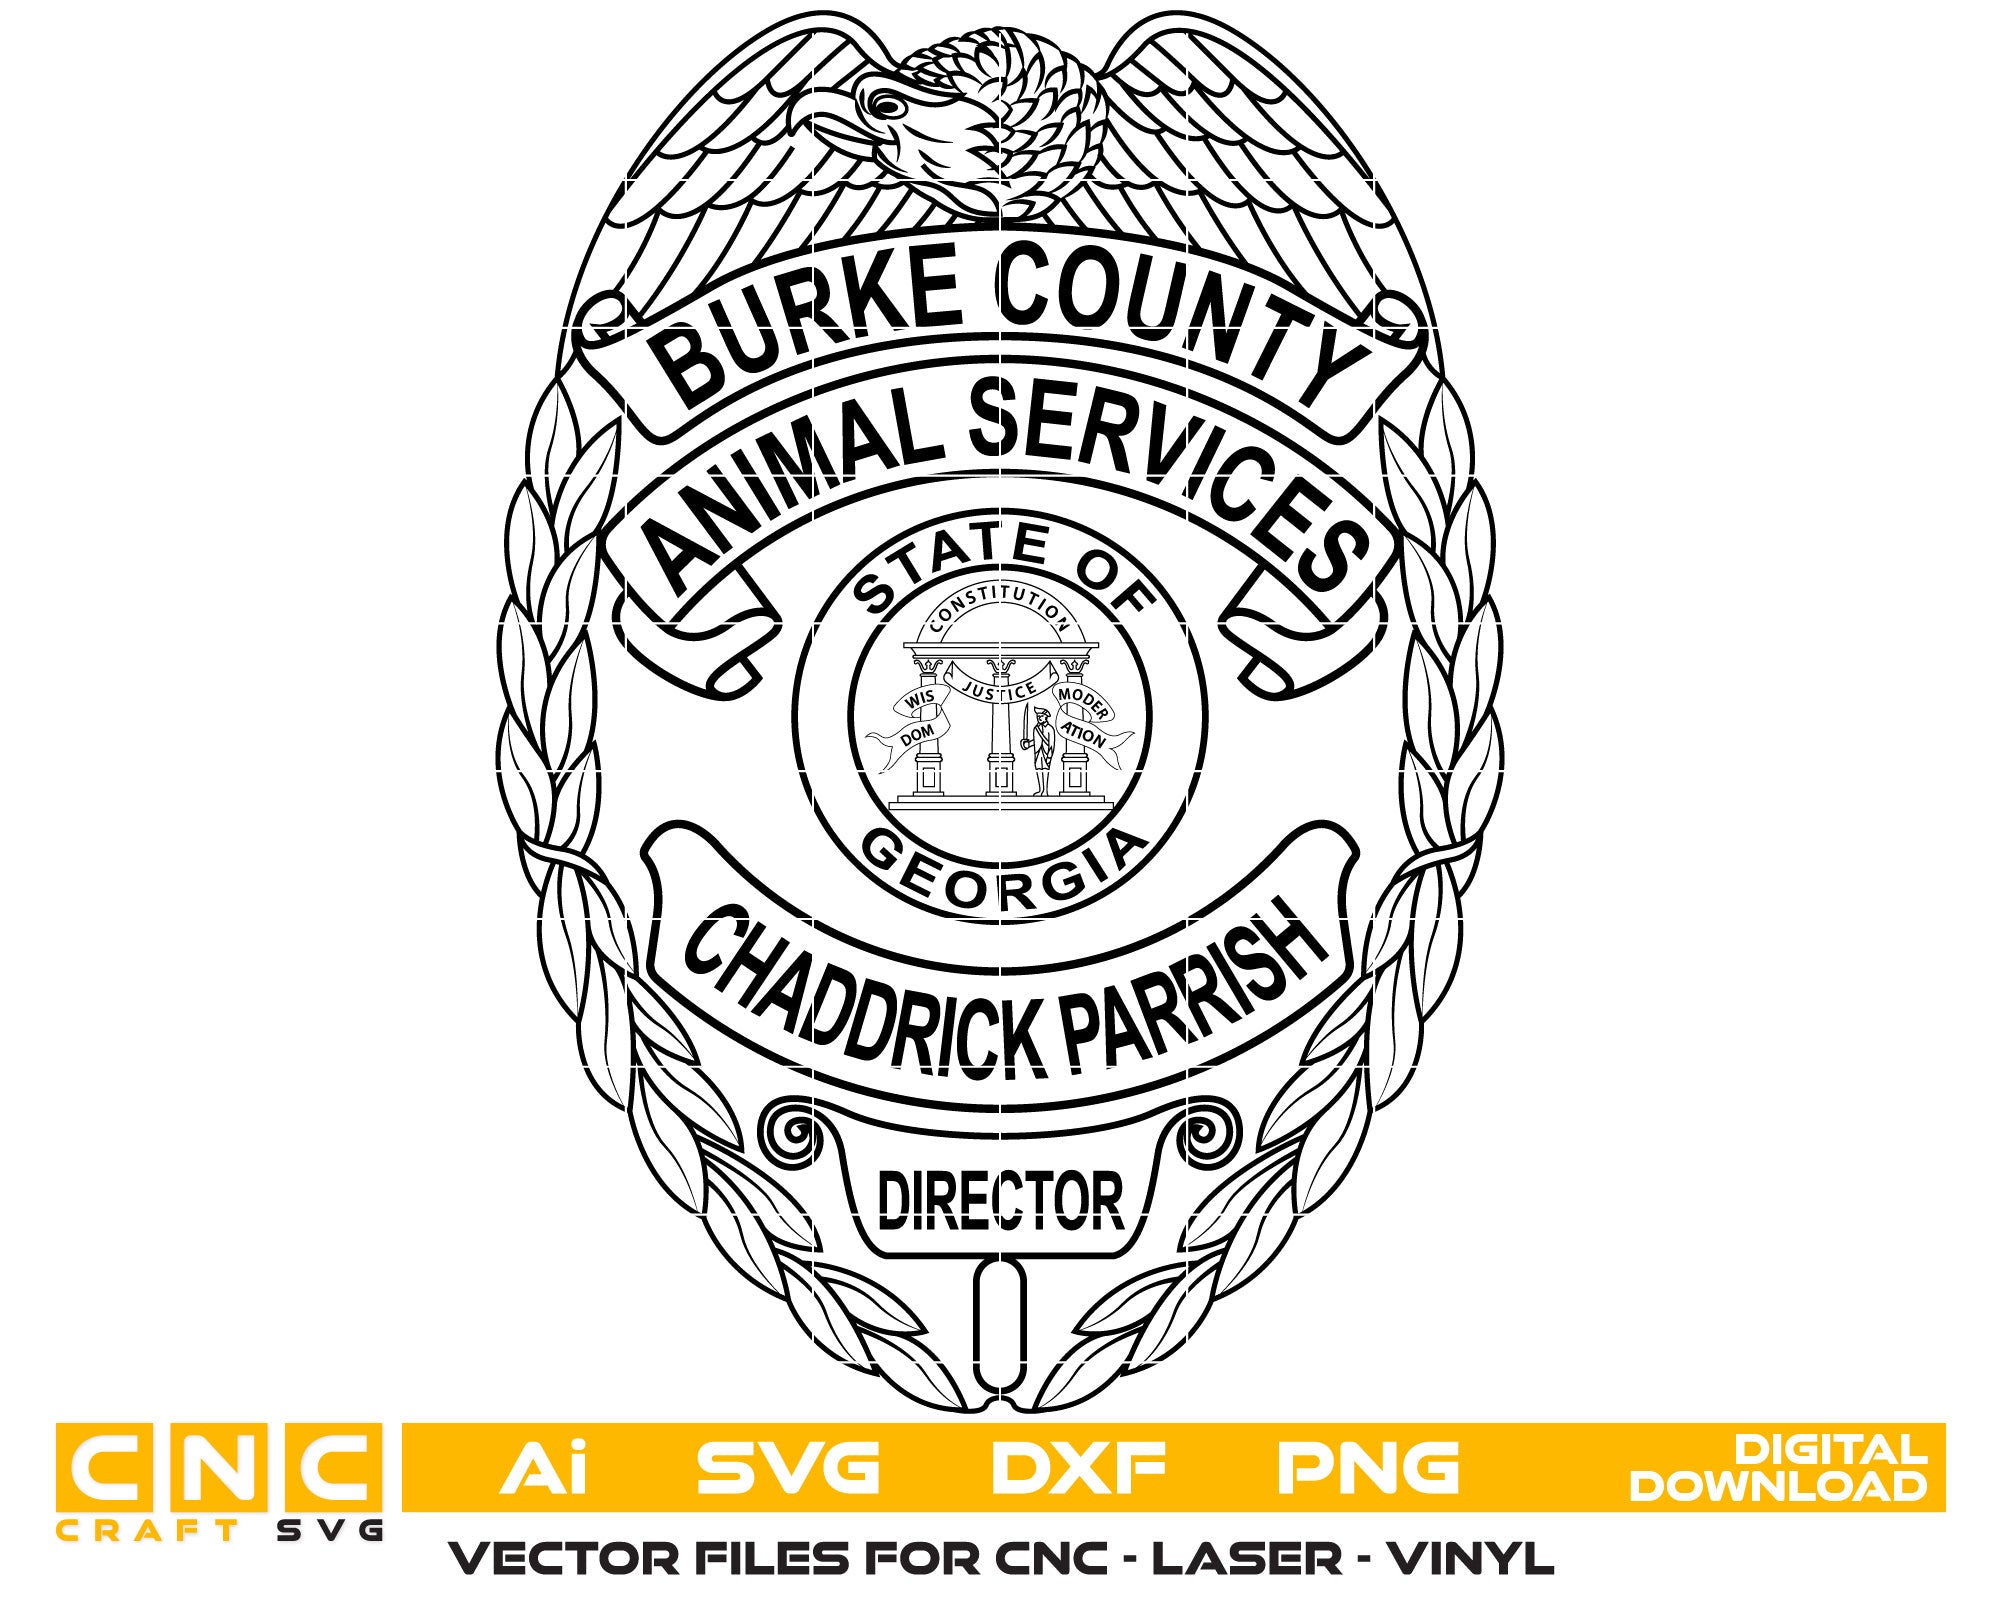 Burke County Animal Services Badge Vector Art, Ai,SVG, DXF, PNG, Digital Files